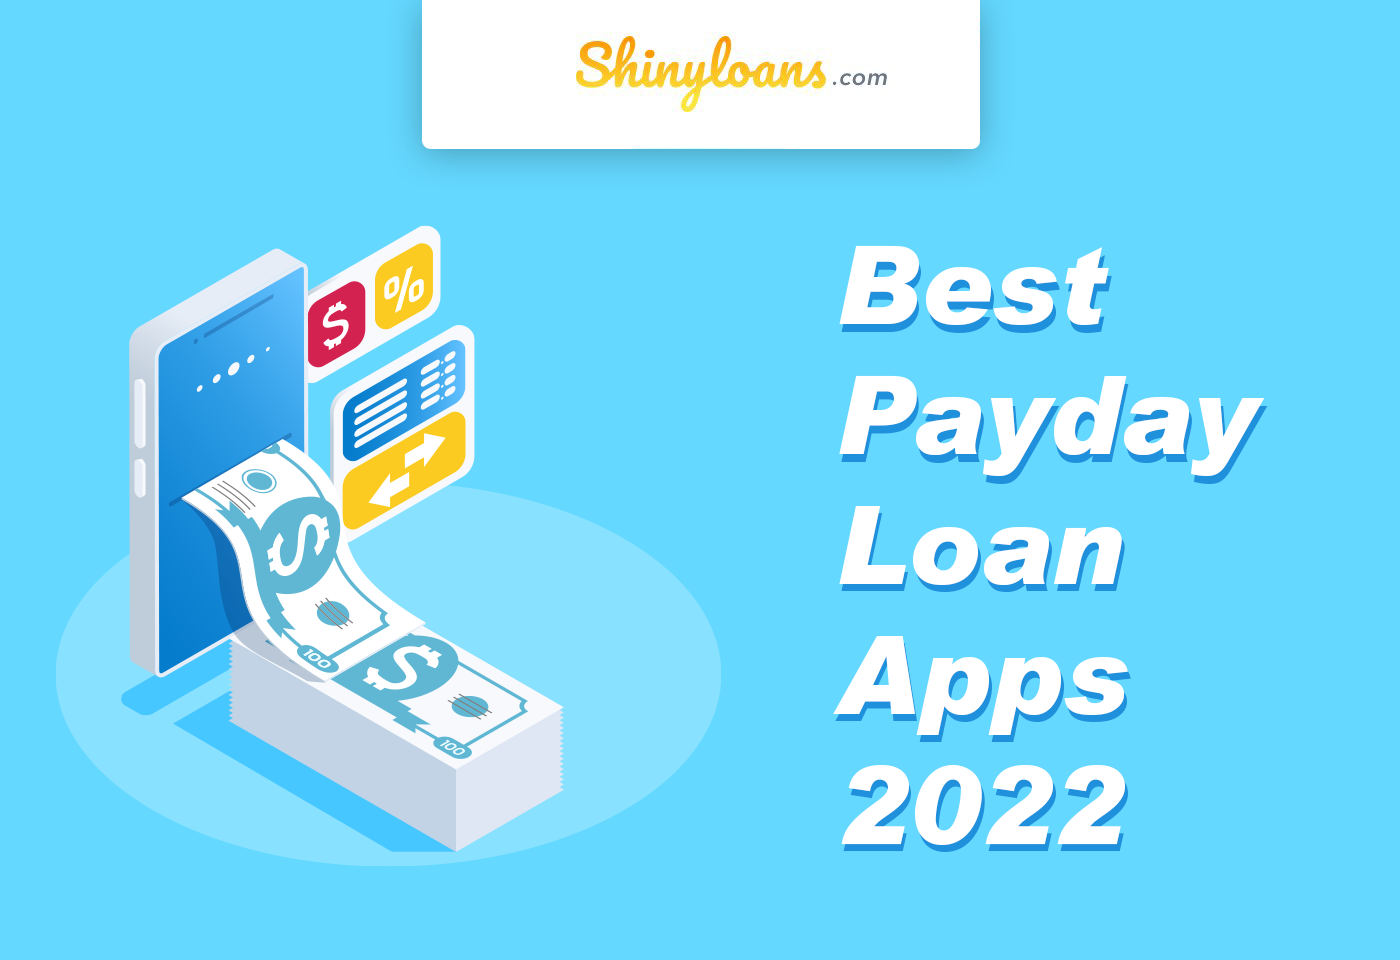 Best Payday Loan Apps 2022